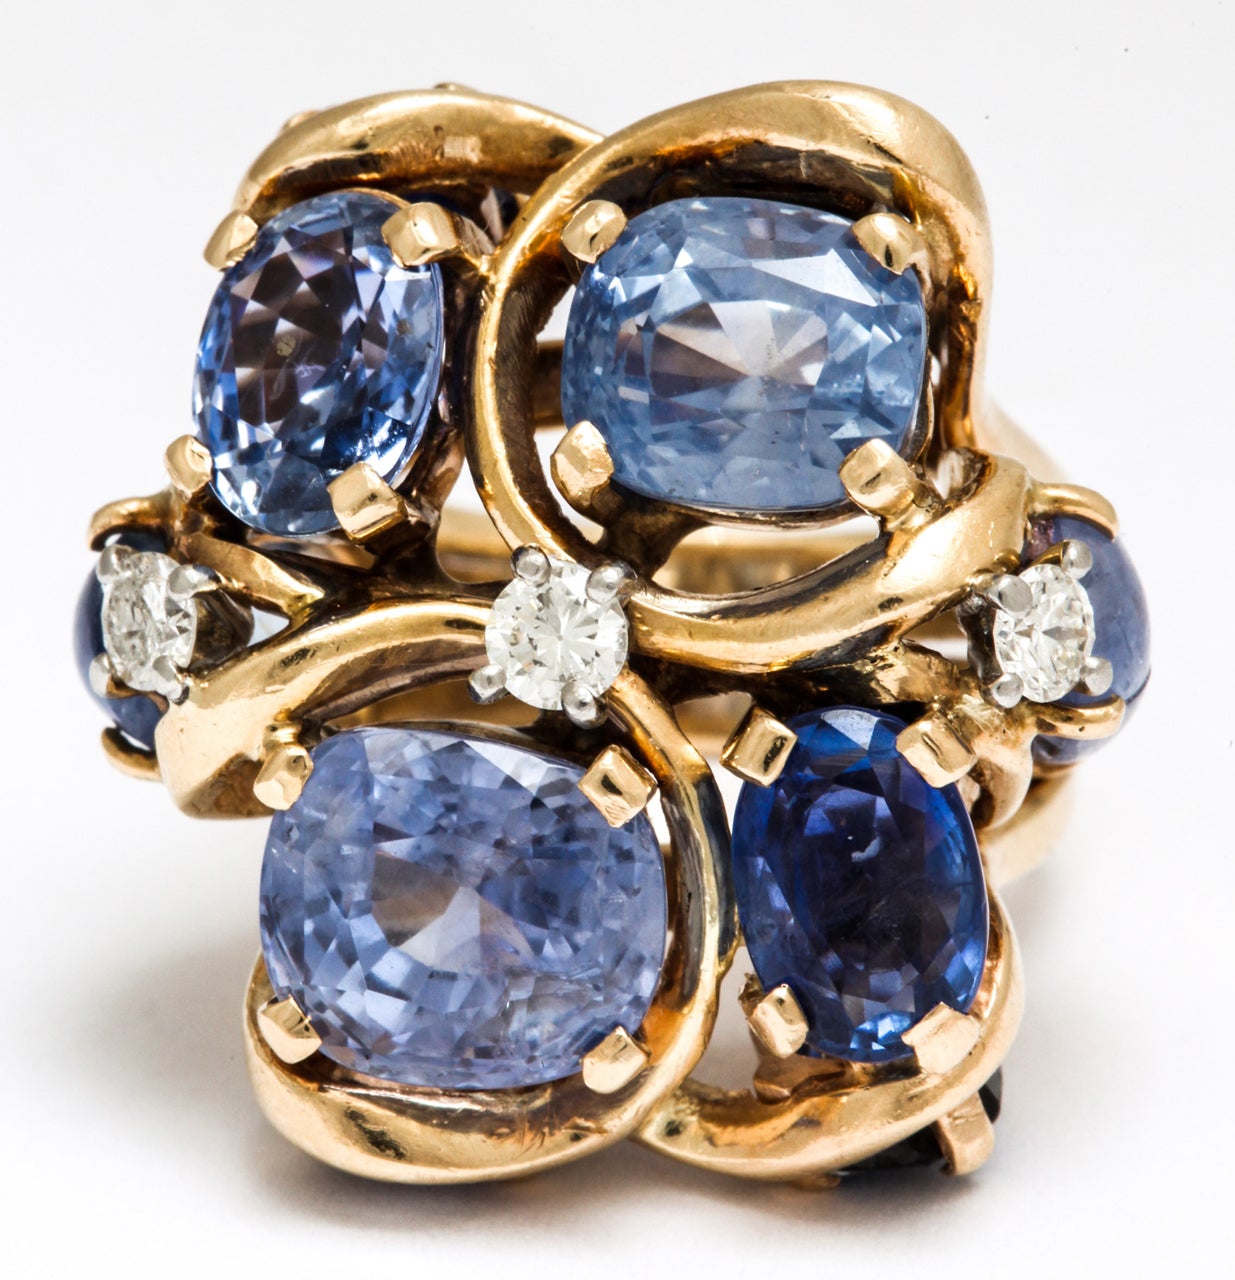 10 oval sapphires 21.00 carats
3 diamonds 0.50 carats
amazing design original Seaman Schepps 1940's
all major stones have been re polished and weighed